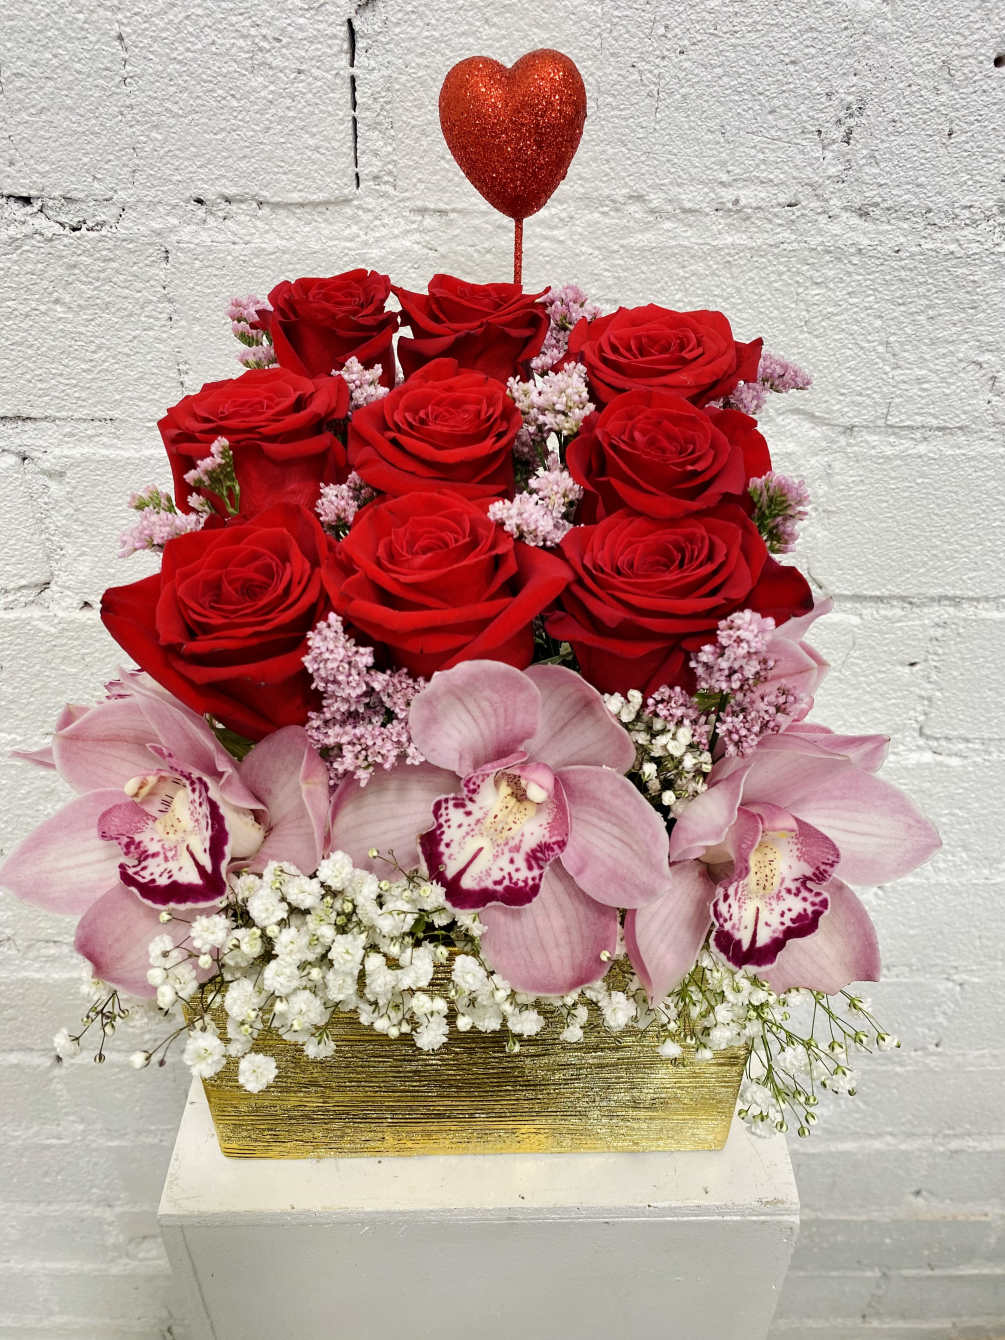 Romantic red roses and pink cymbidium orchids in a brushed golden box.